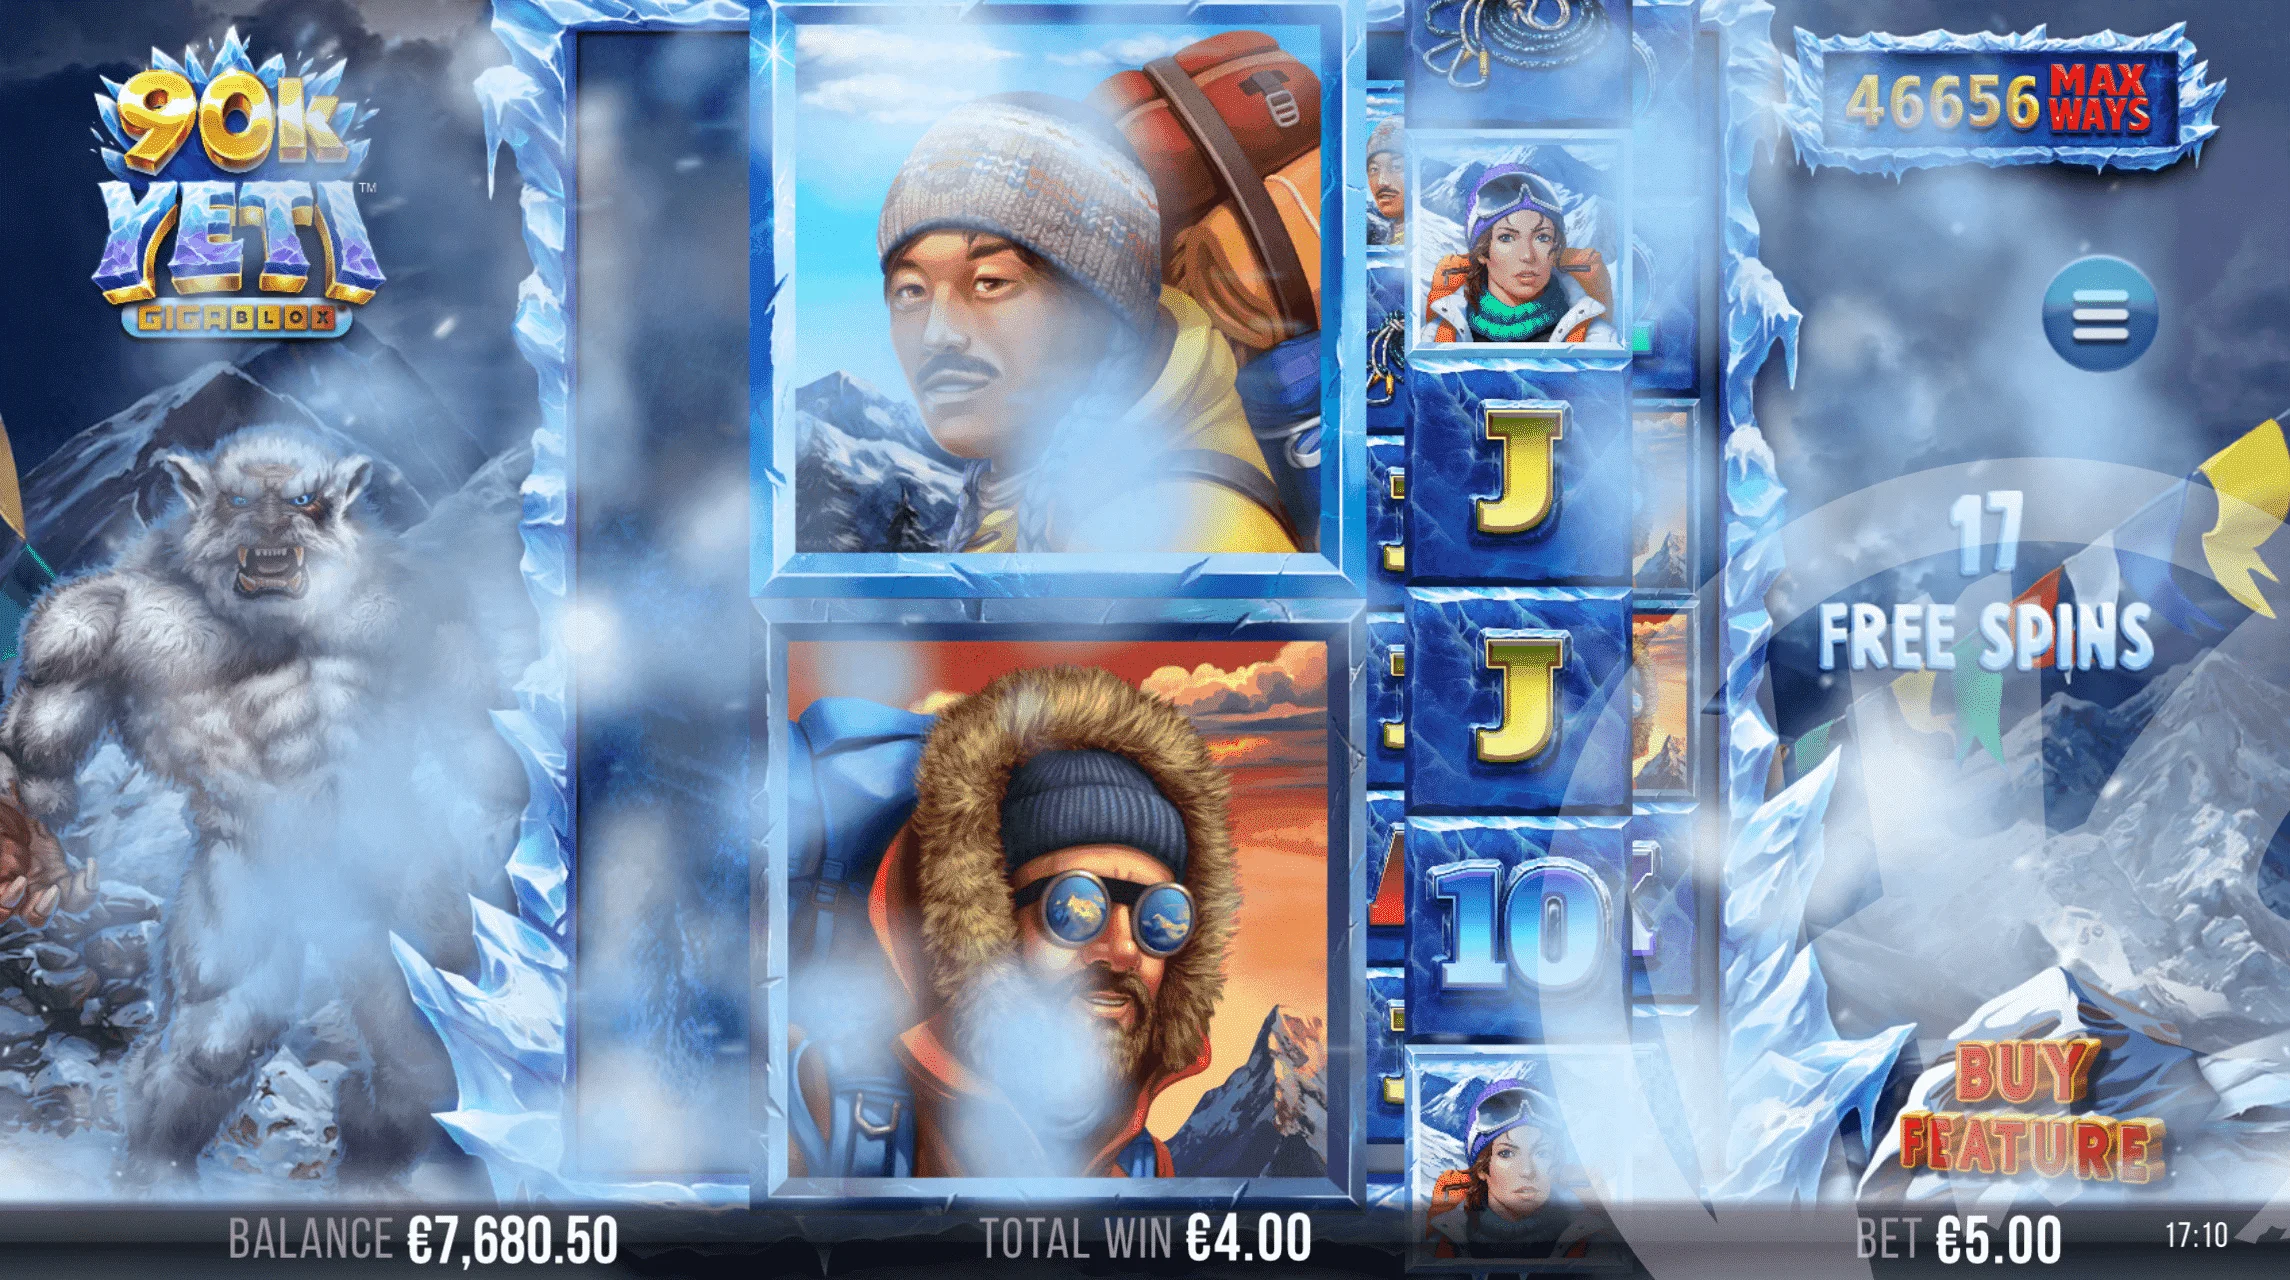 Free Spins - Snowstorm Feature